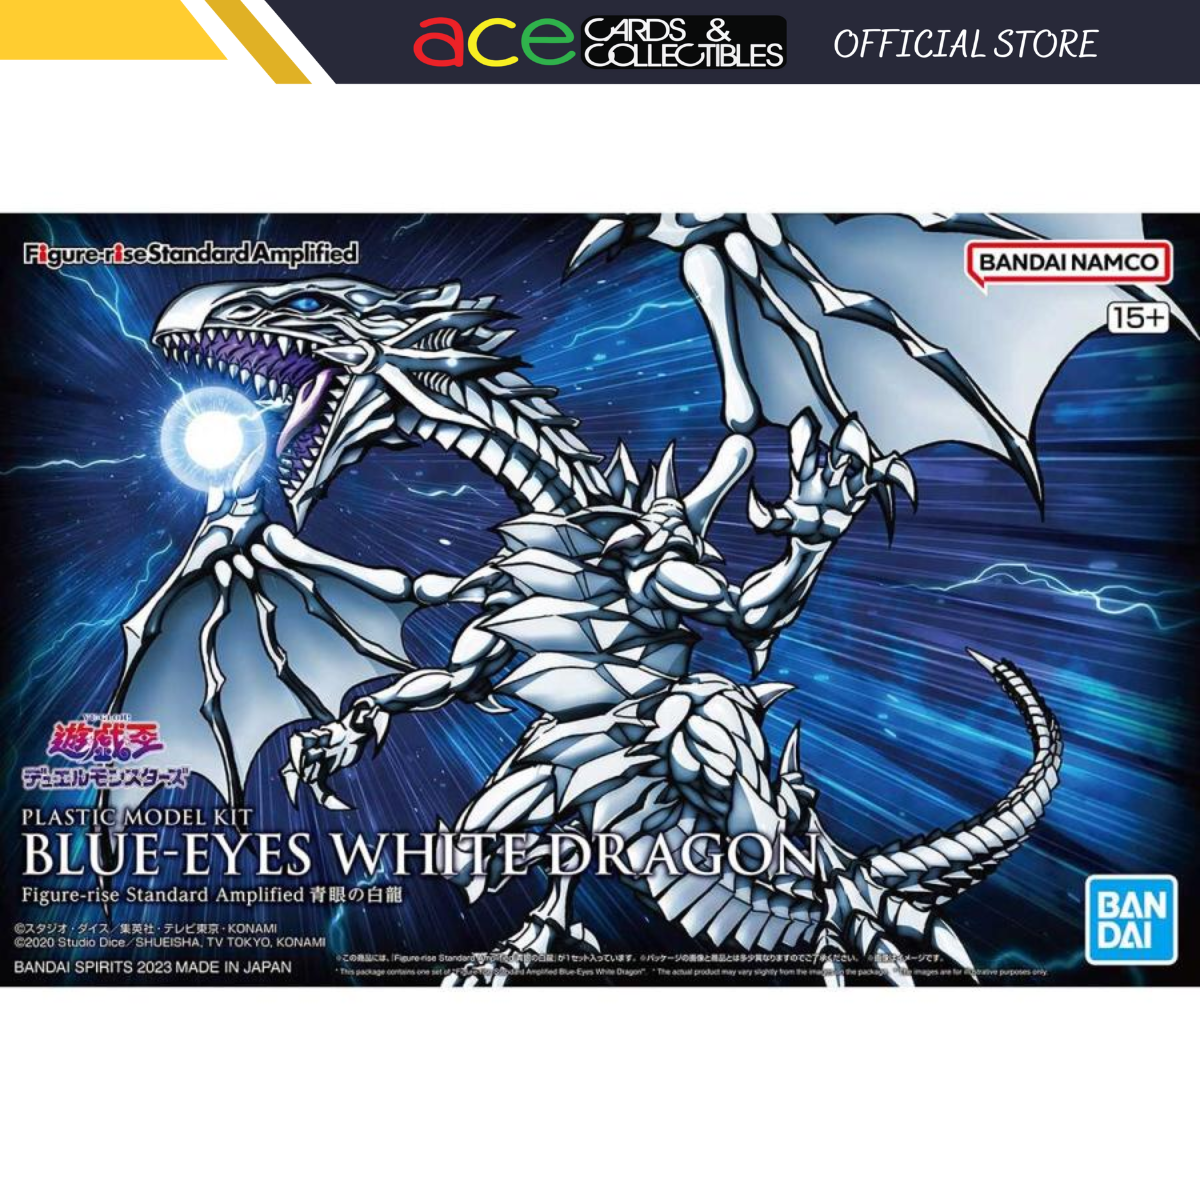 Yu-Gi-Oh! Figure Rise Standard Amplified "Blue-Eyes White Dragon" Model Kit-Bandai-Ace Cards & Collectibles